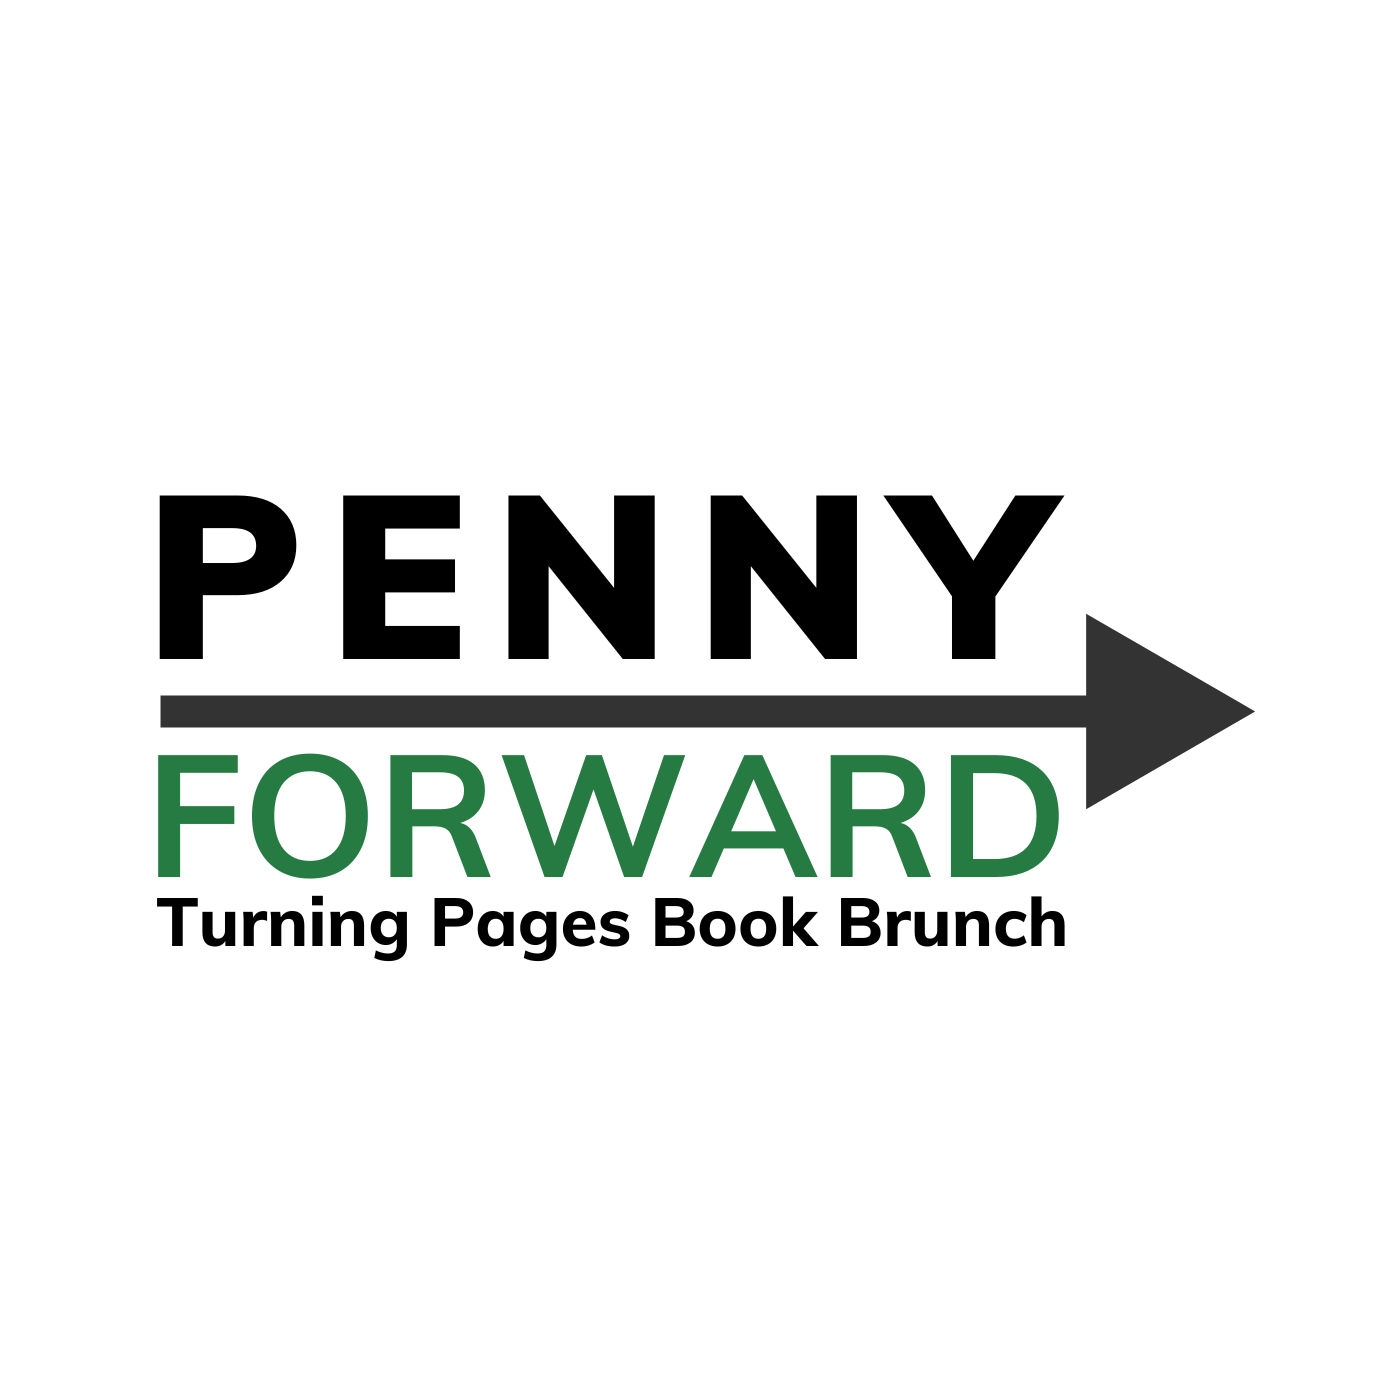 Tuesday Turning Pages Book Brunch